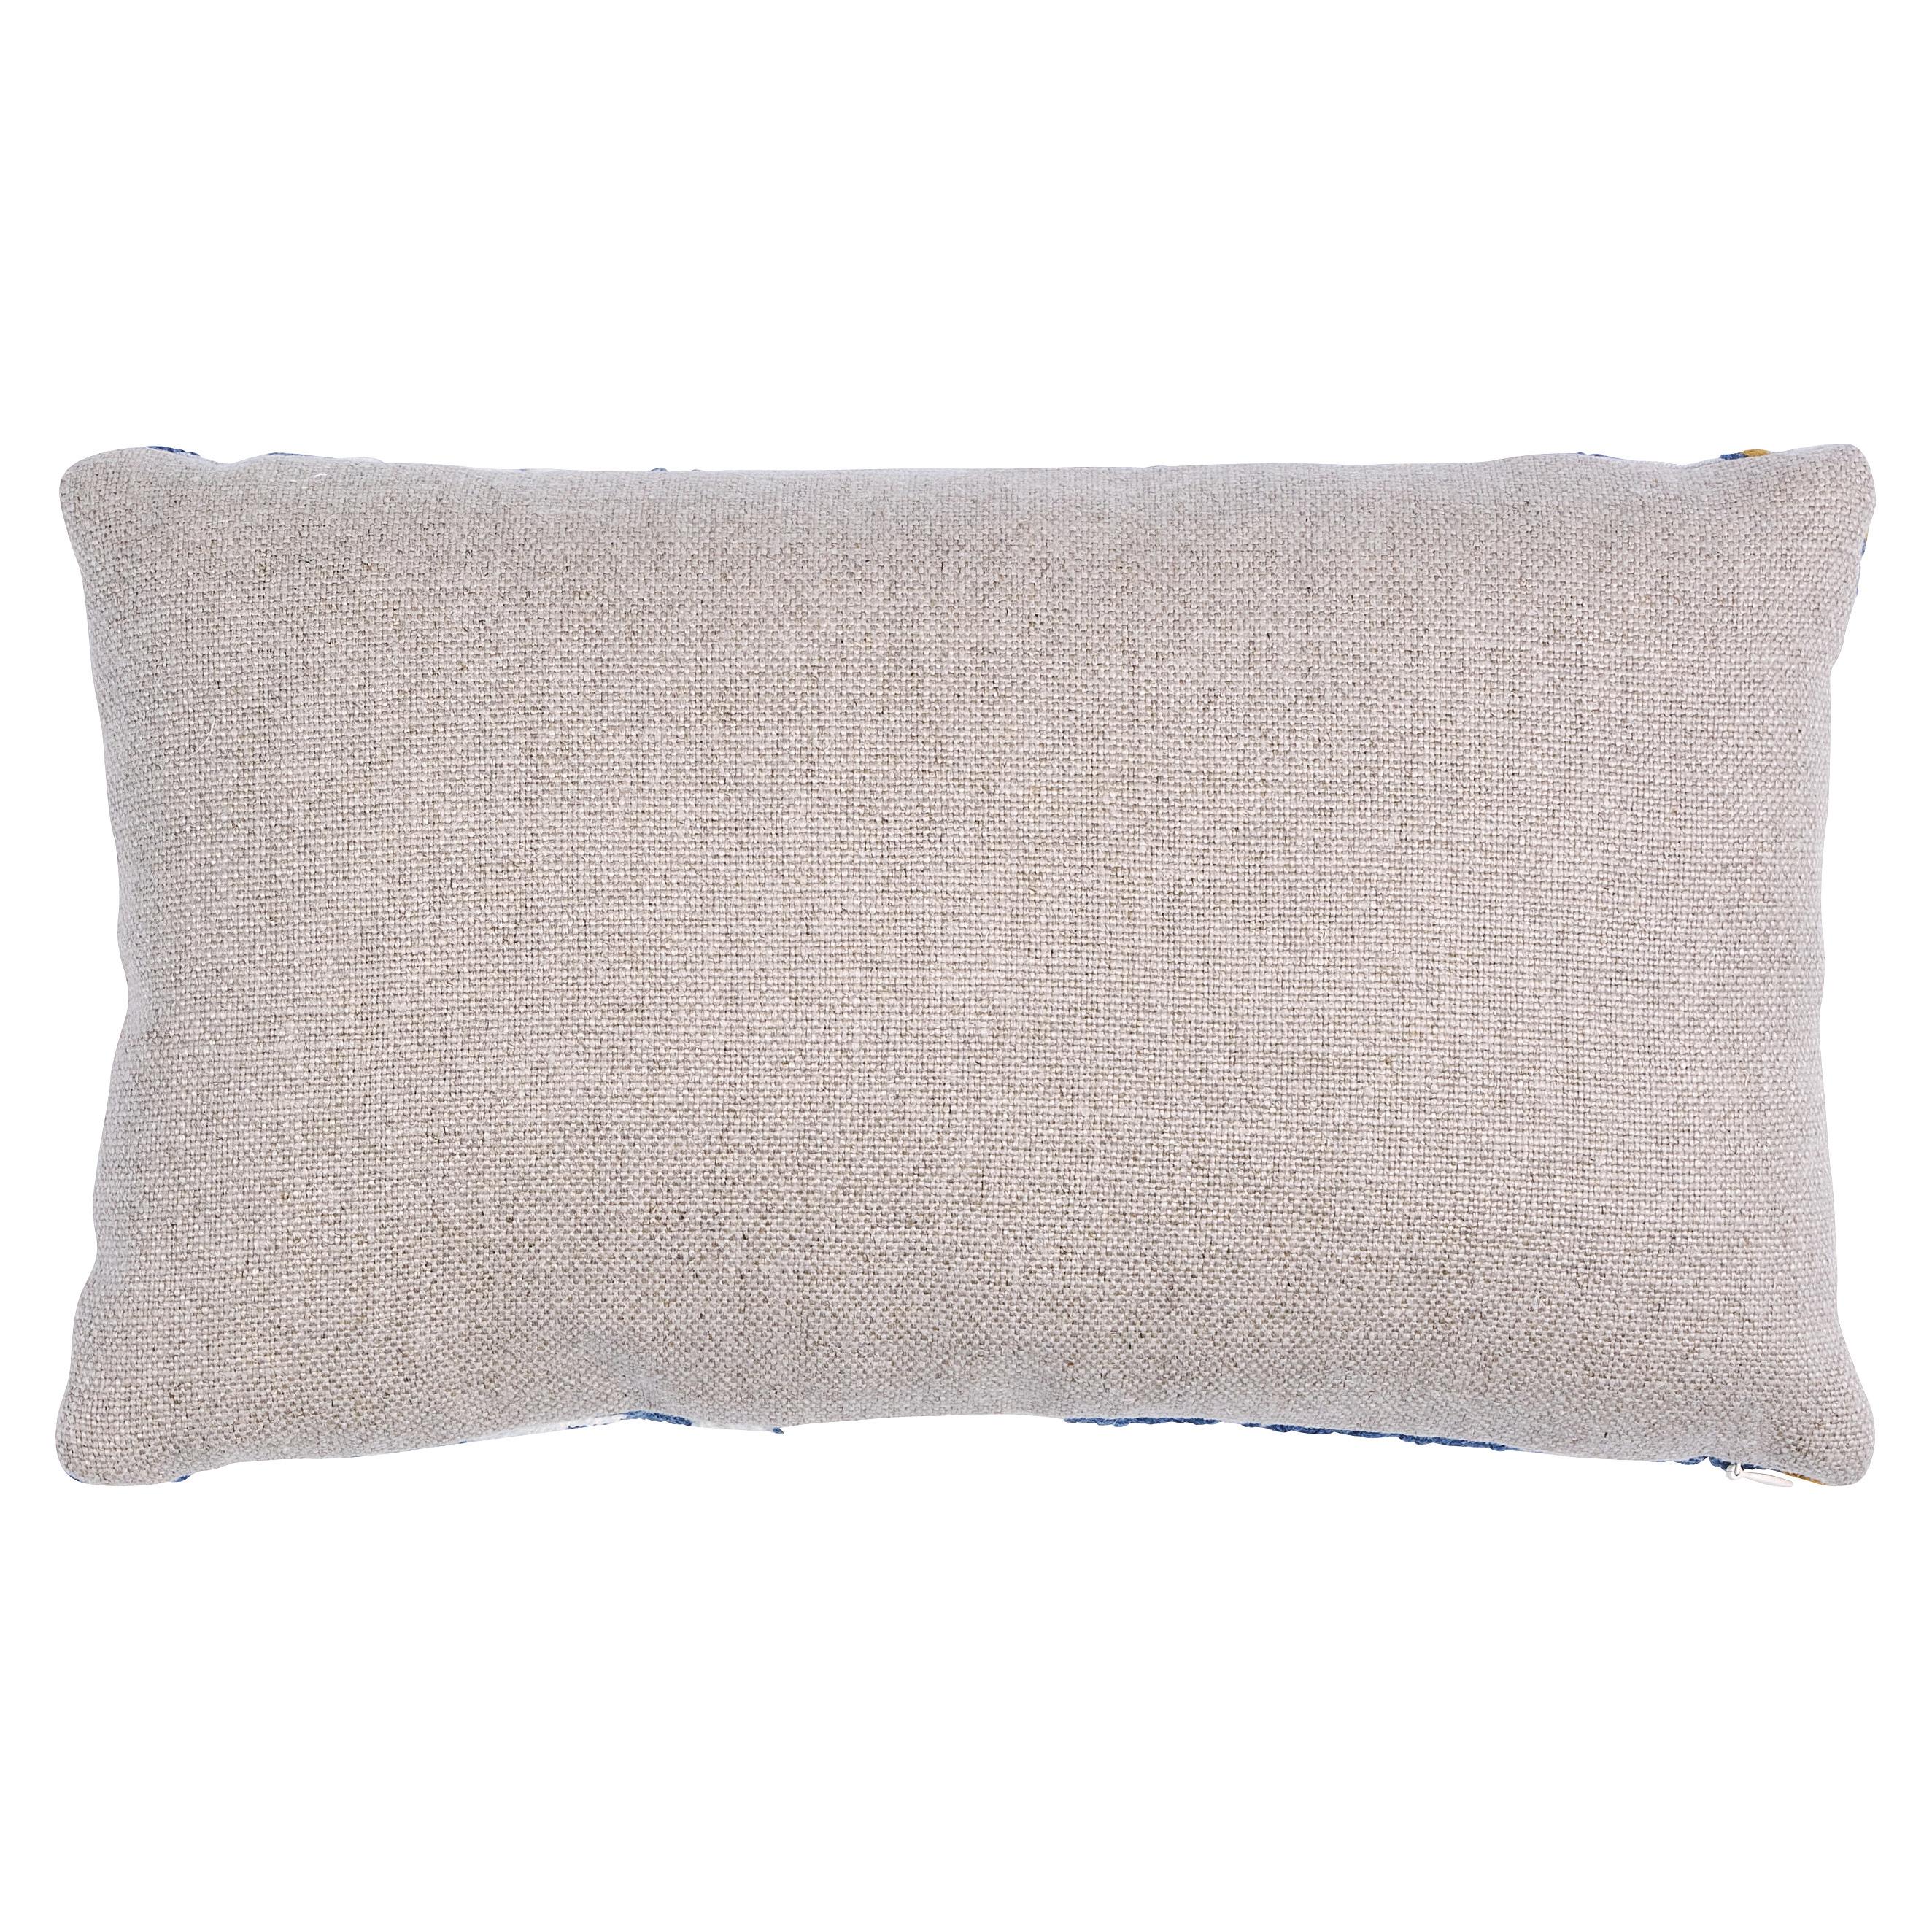 This pillow features Marguerite Embroidery with a knife edge finish. Happy and humble, Marguerite Embroidery features a hand-stitched floral design on a linen ground. Subtle irregularities in the wool yarns create dimension and quaint charm. Pillow